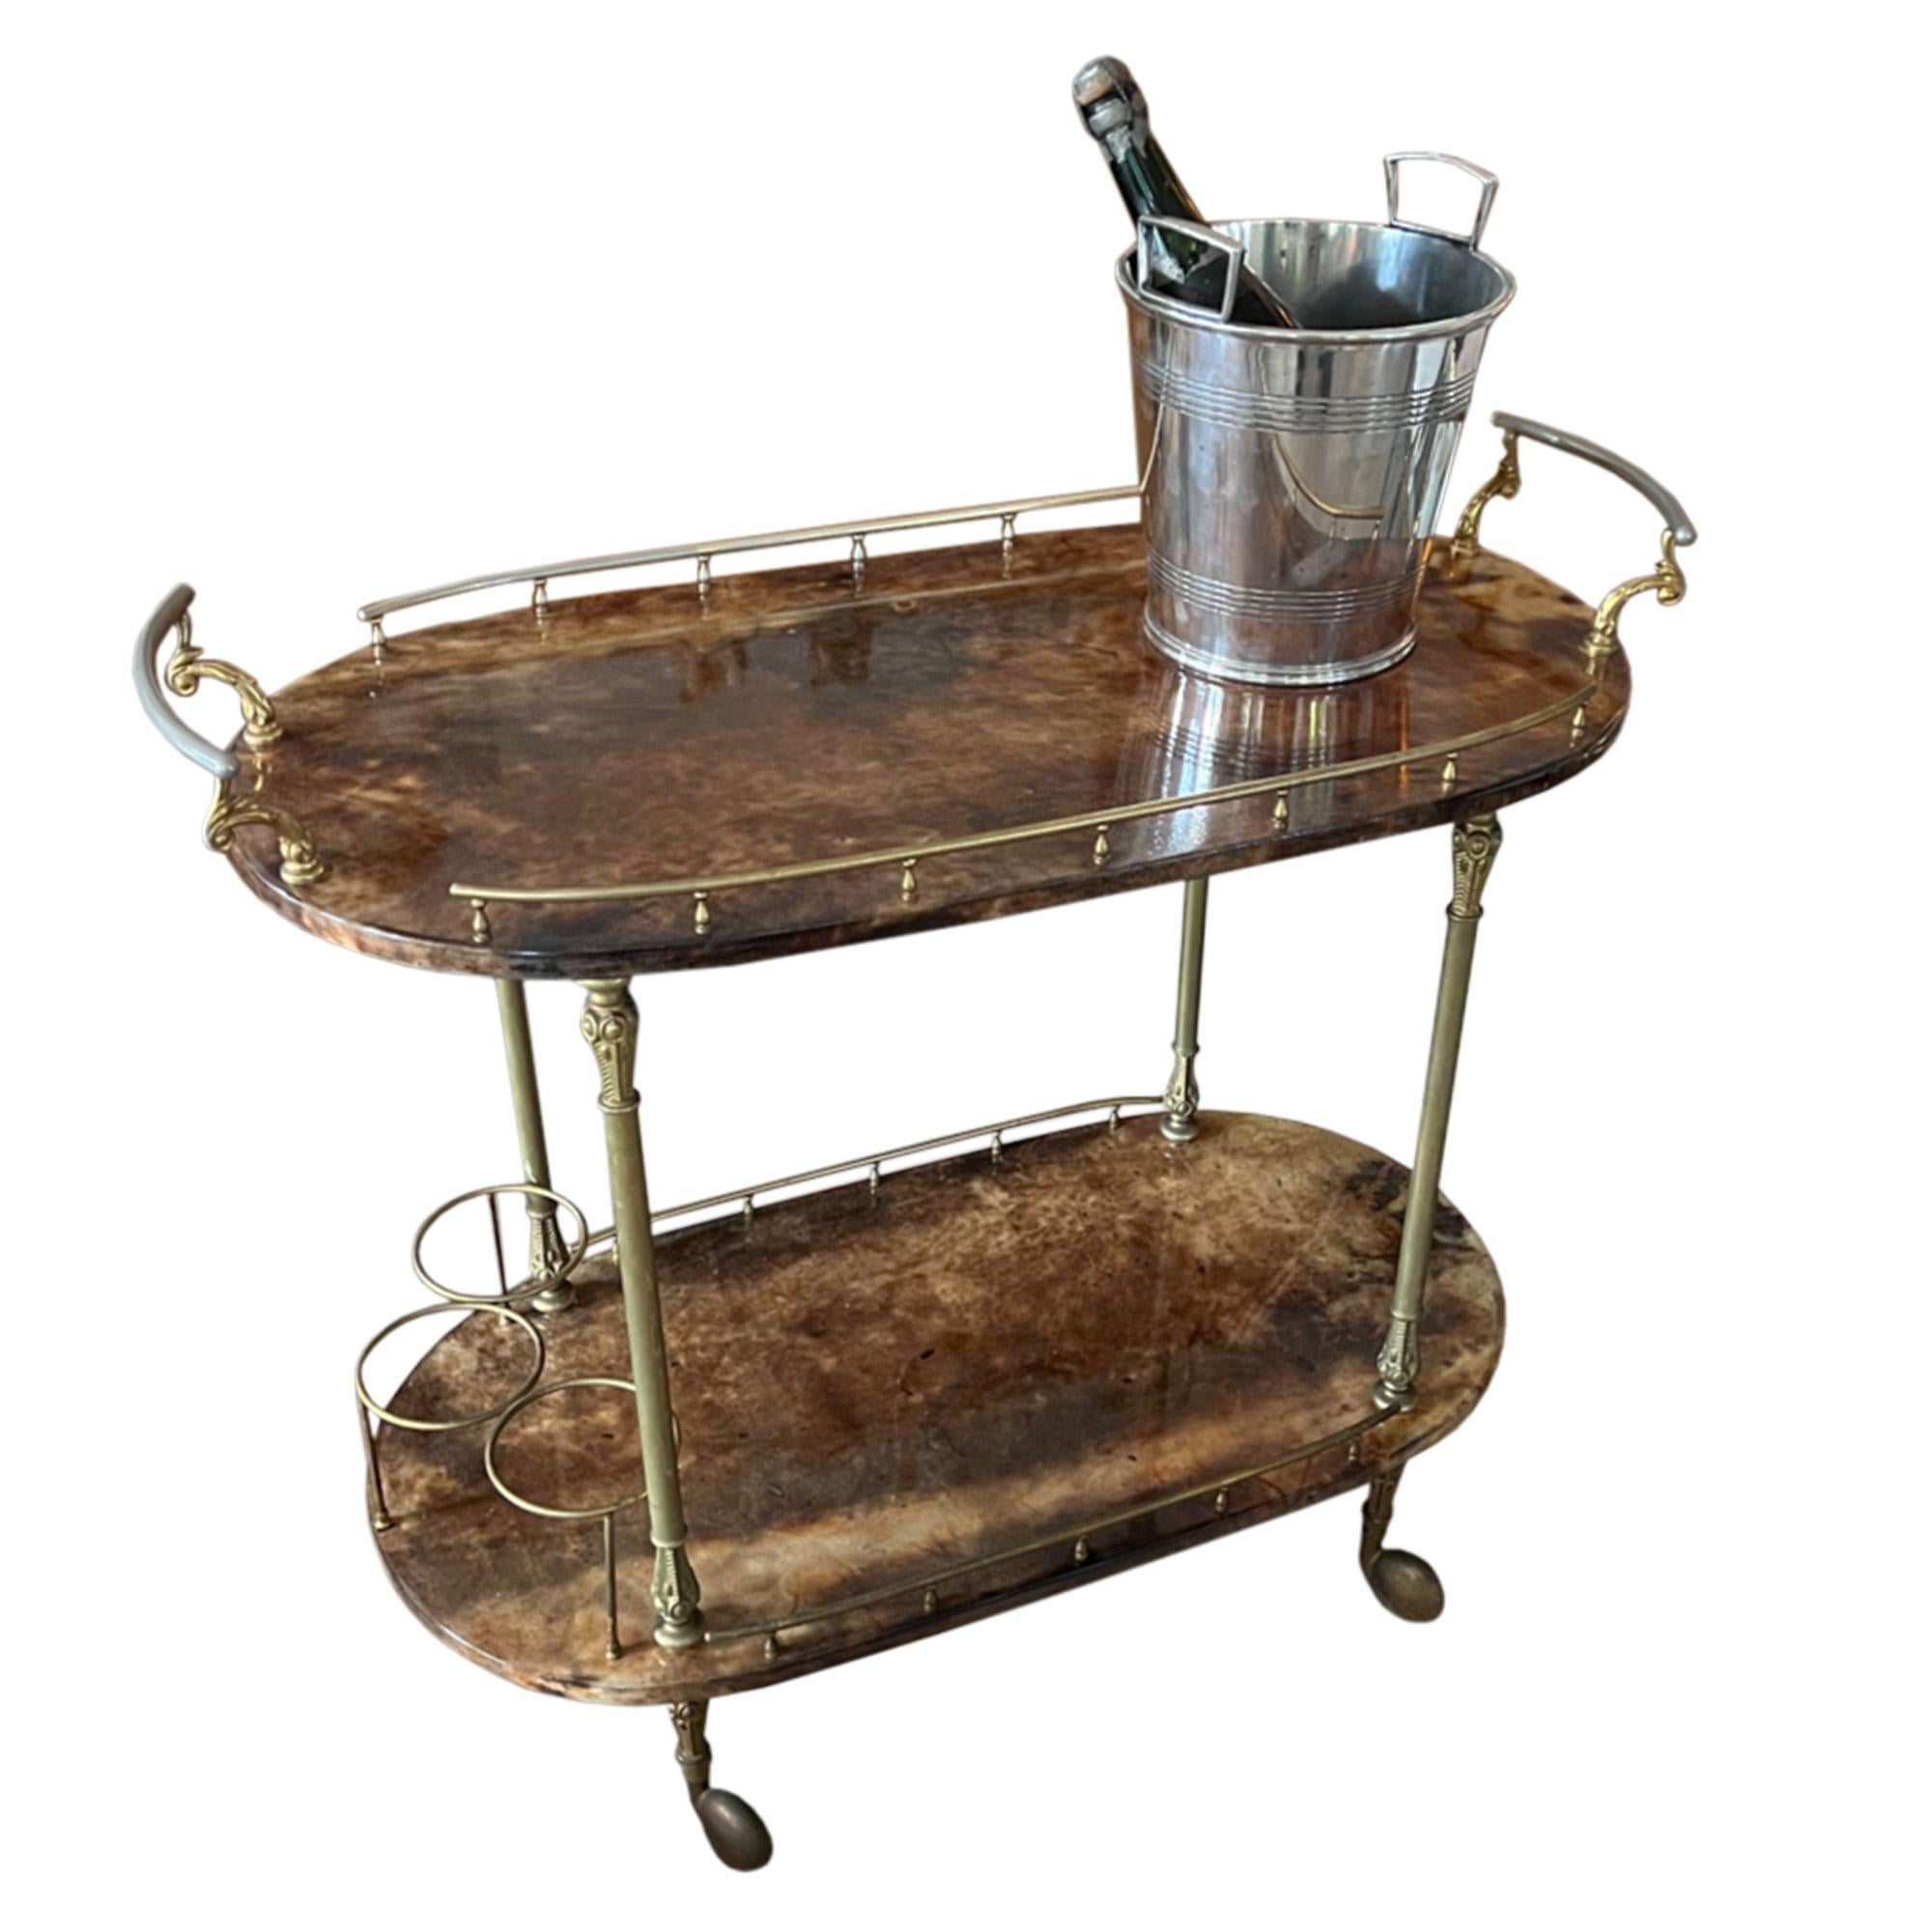 This wonderful lacquered goatskin and brass mid century drinks trolley was designed in Italy by Aldo Tura. His use of goatskin makes each piece unique. The gilt metal gallery, handles and bottle holders are slightly worn - as expected considering